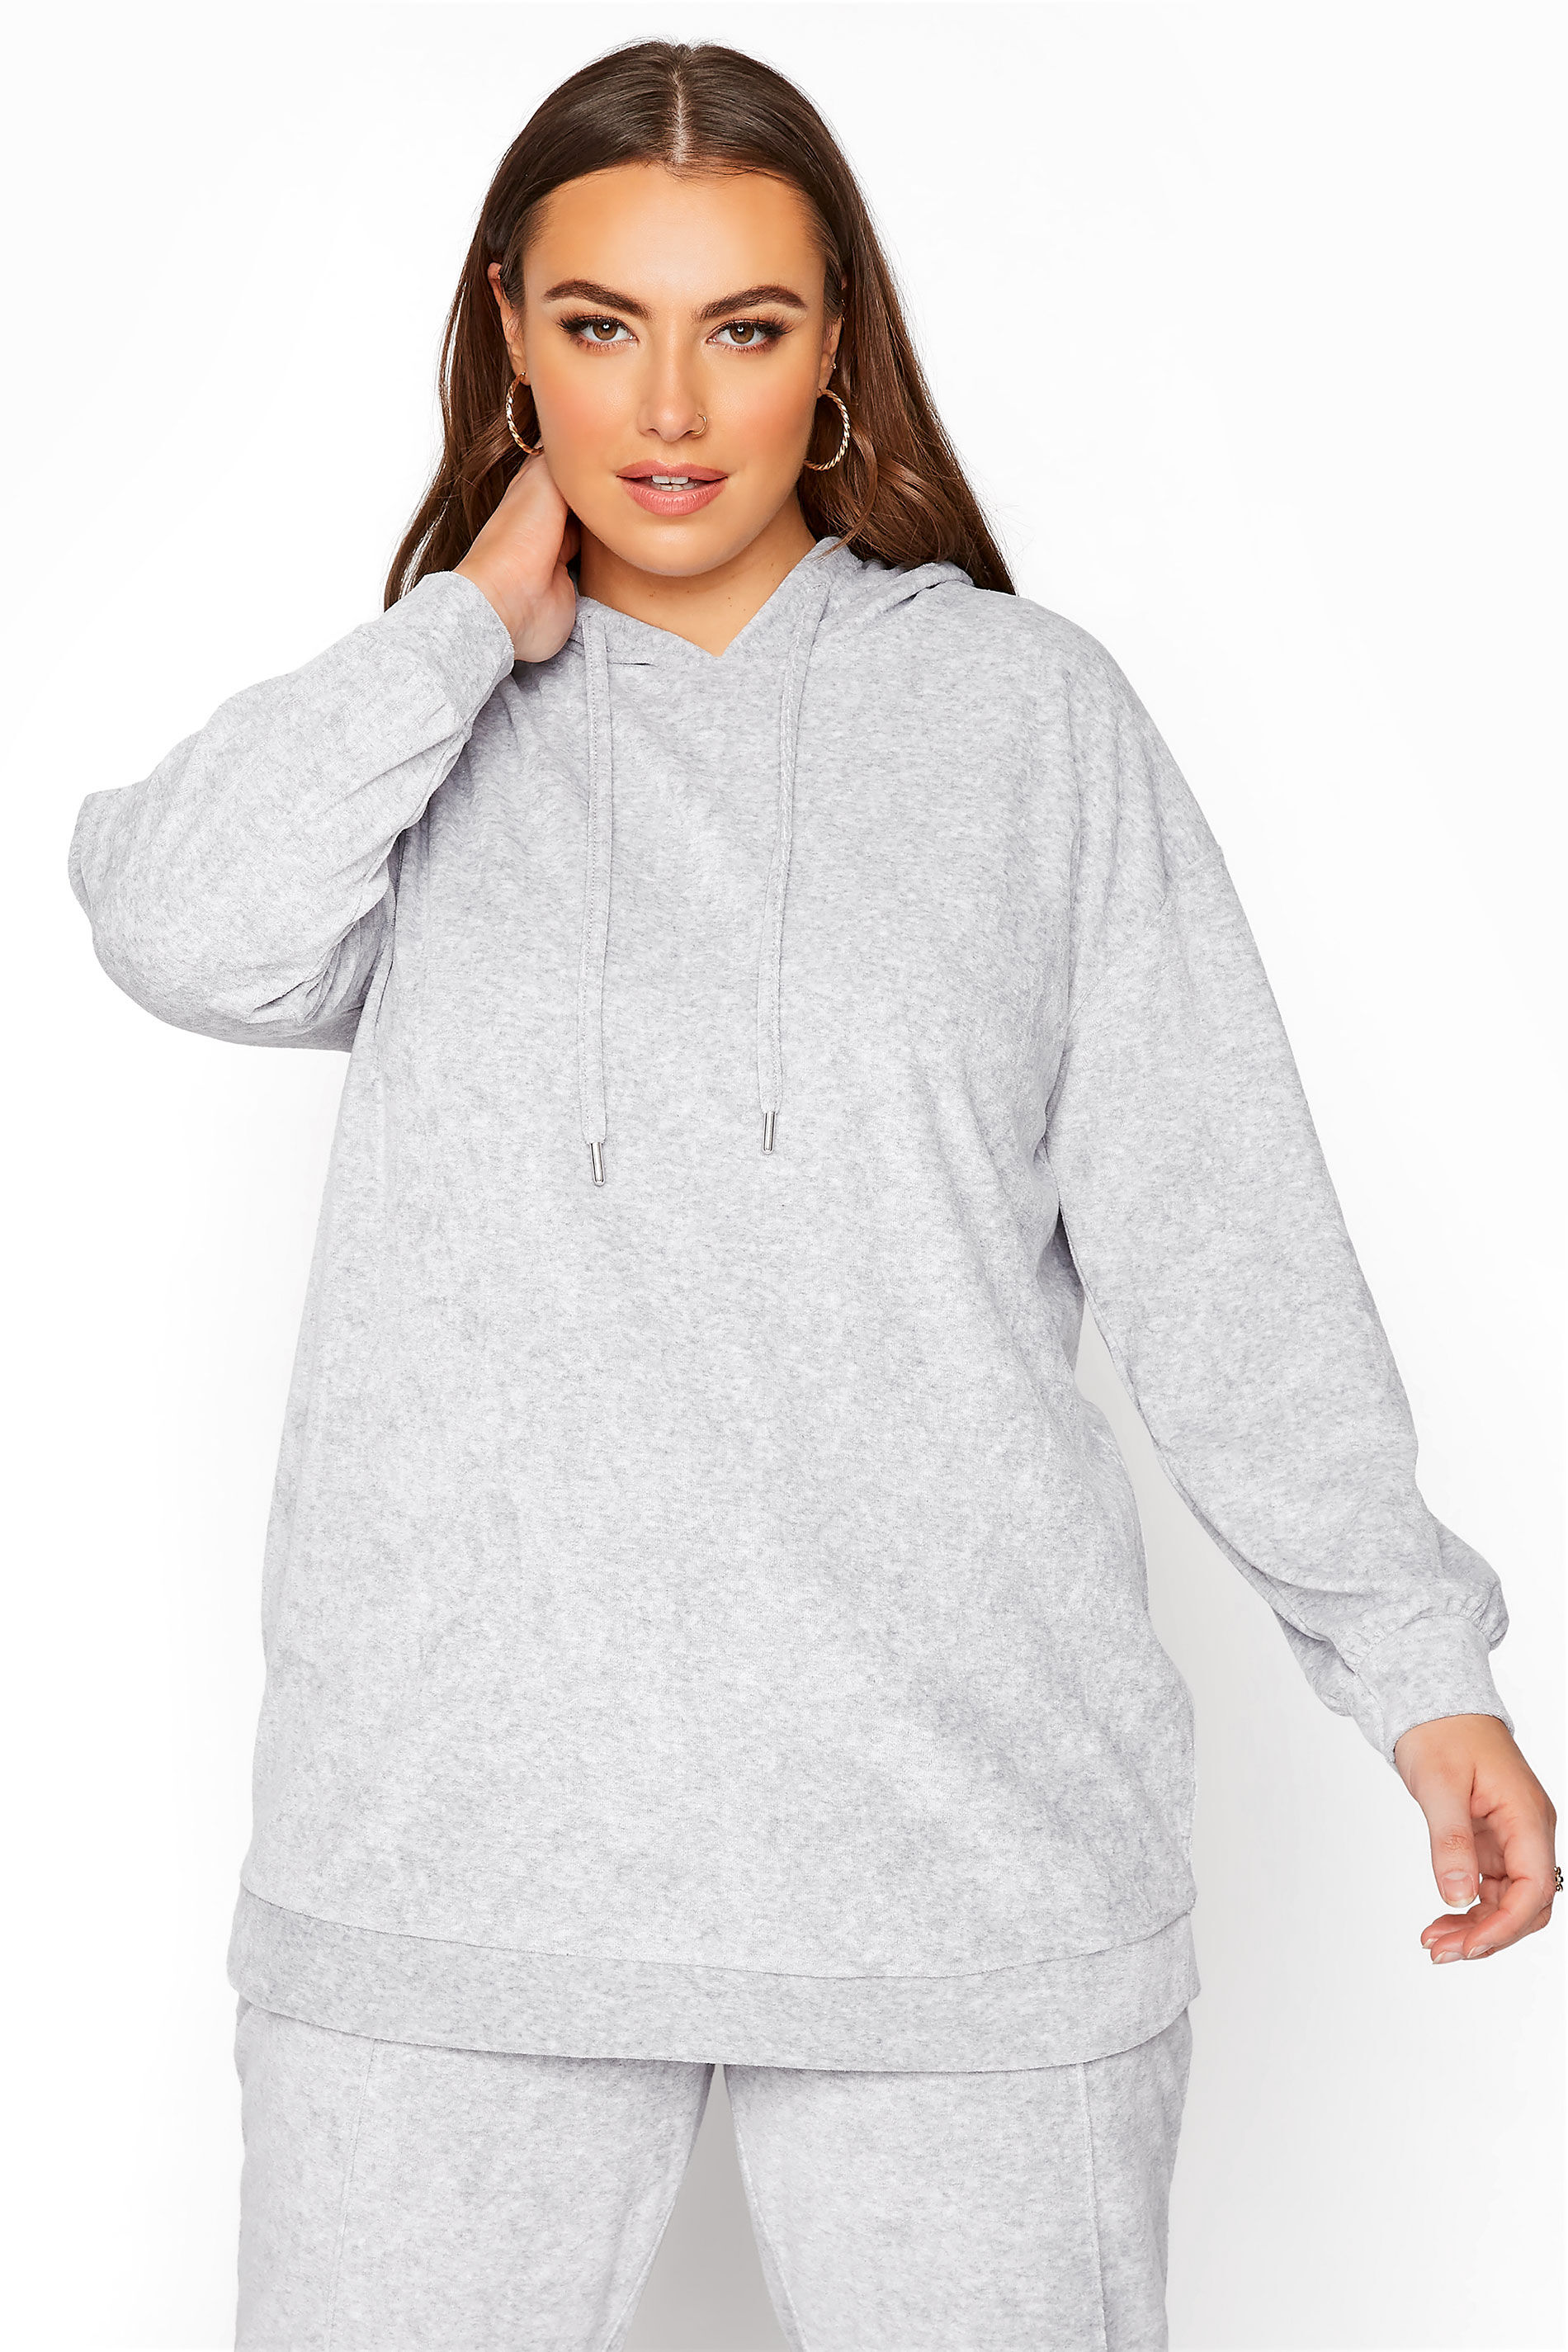 Yours Clothing Plus size grey marl velour sweat hoodie 30-32